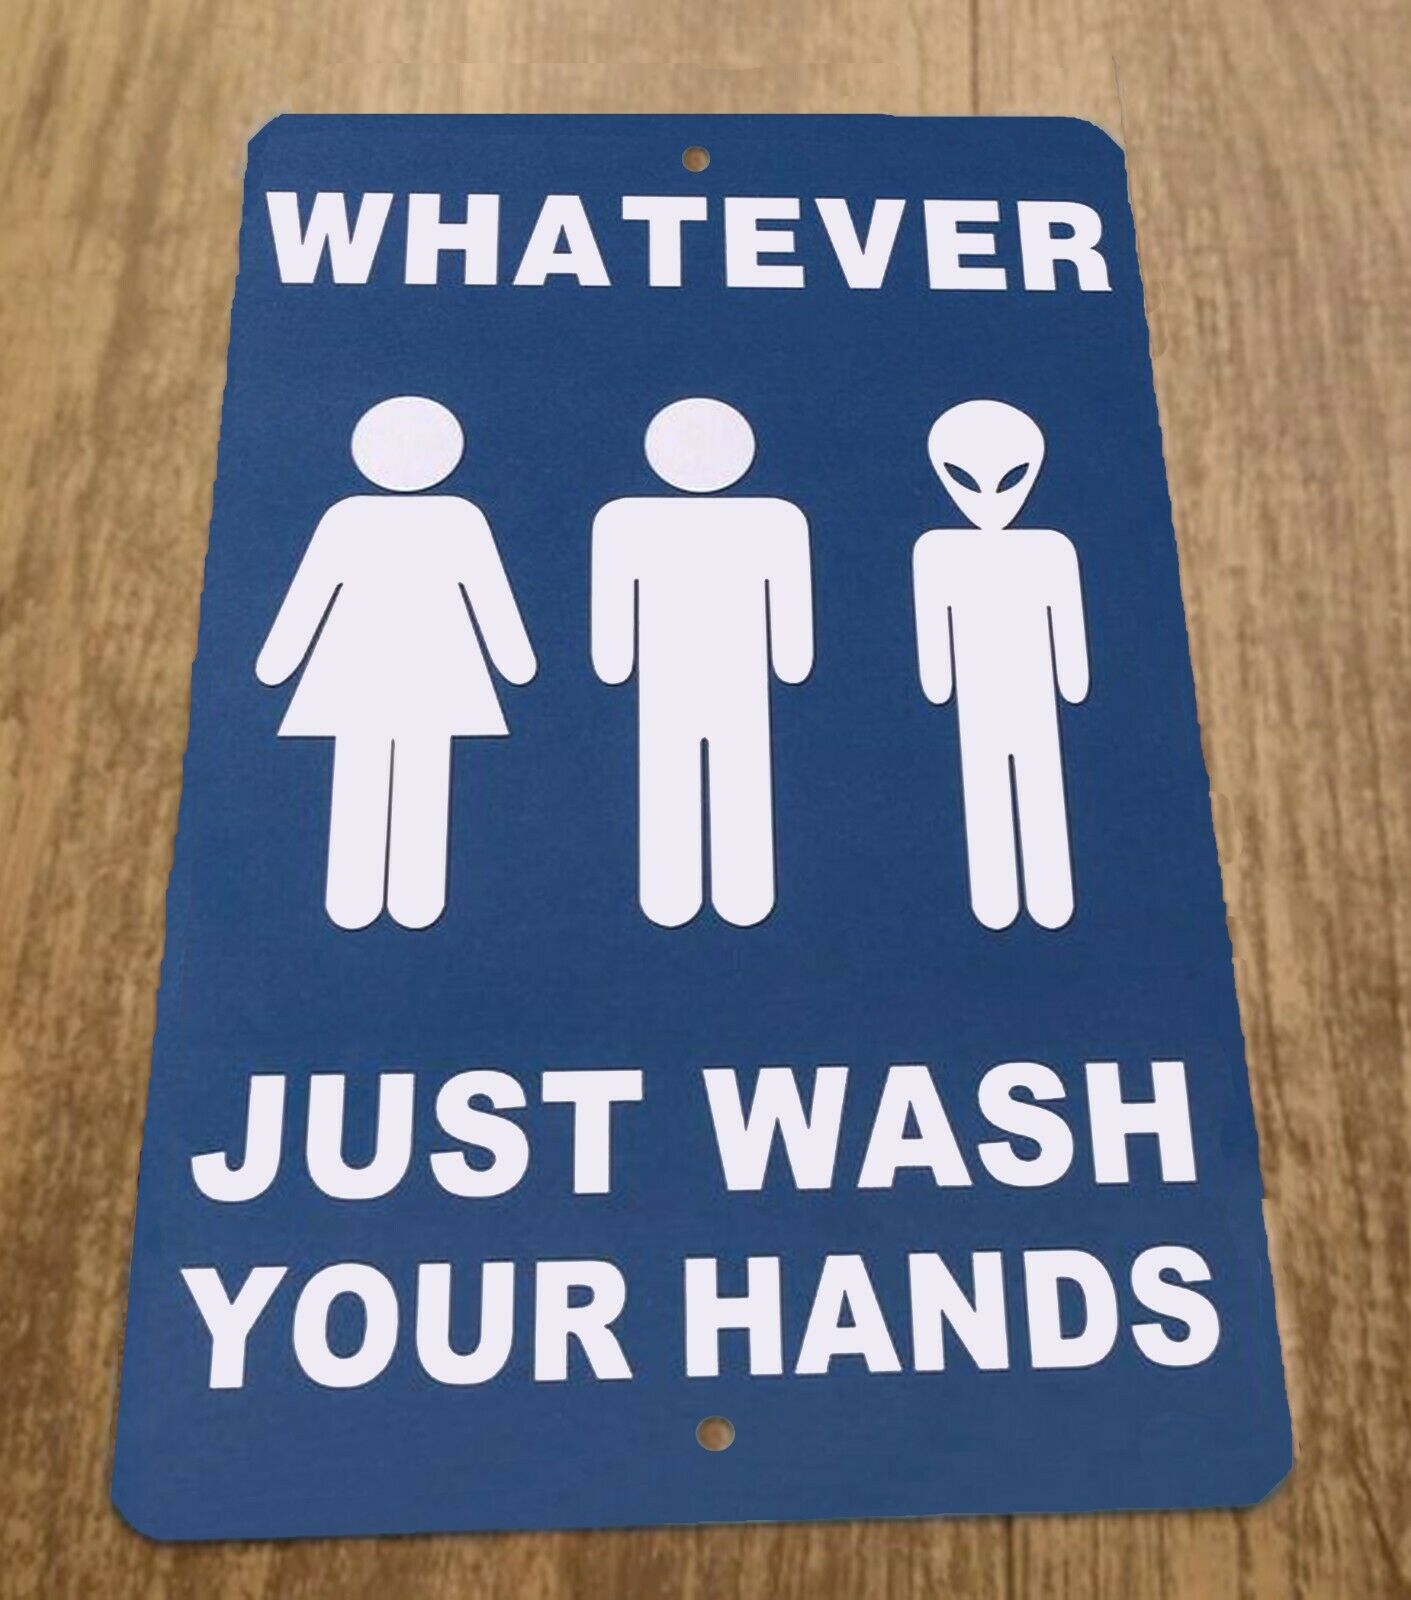 Whatever Just Wash Your Hands Aliens 8x12 Metal Wall Vintage Misc Poster Sign